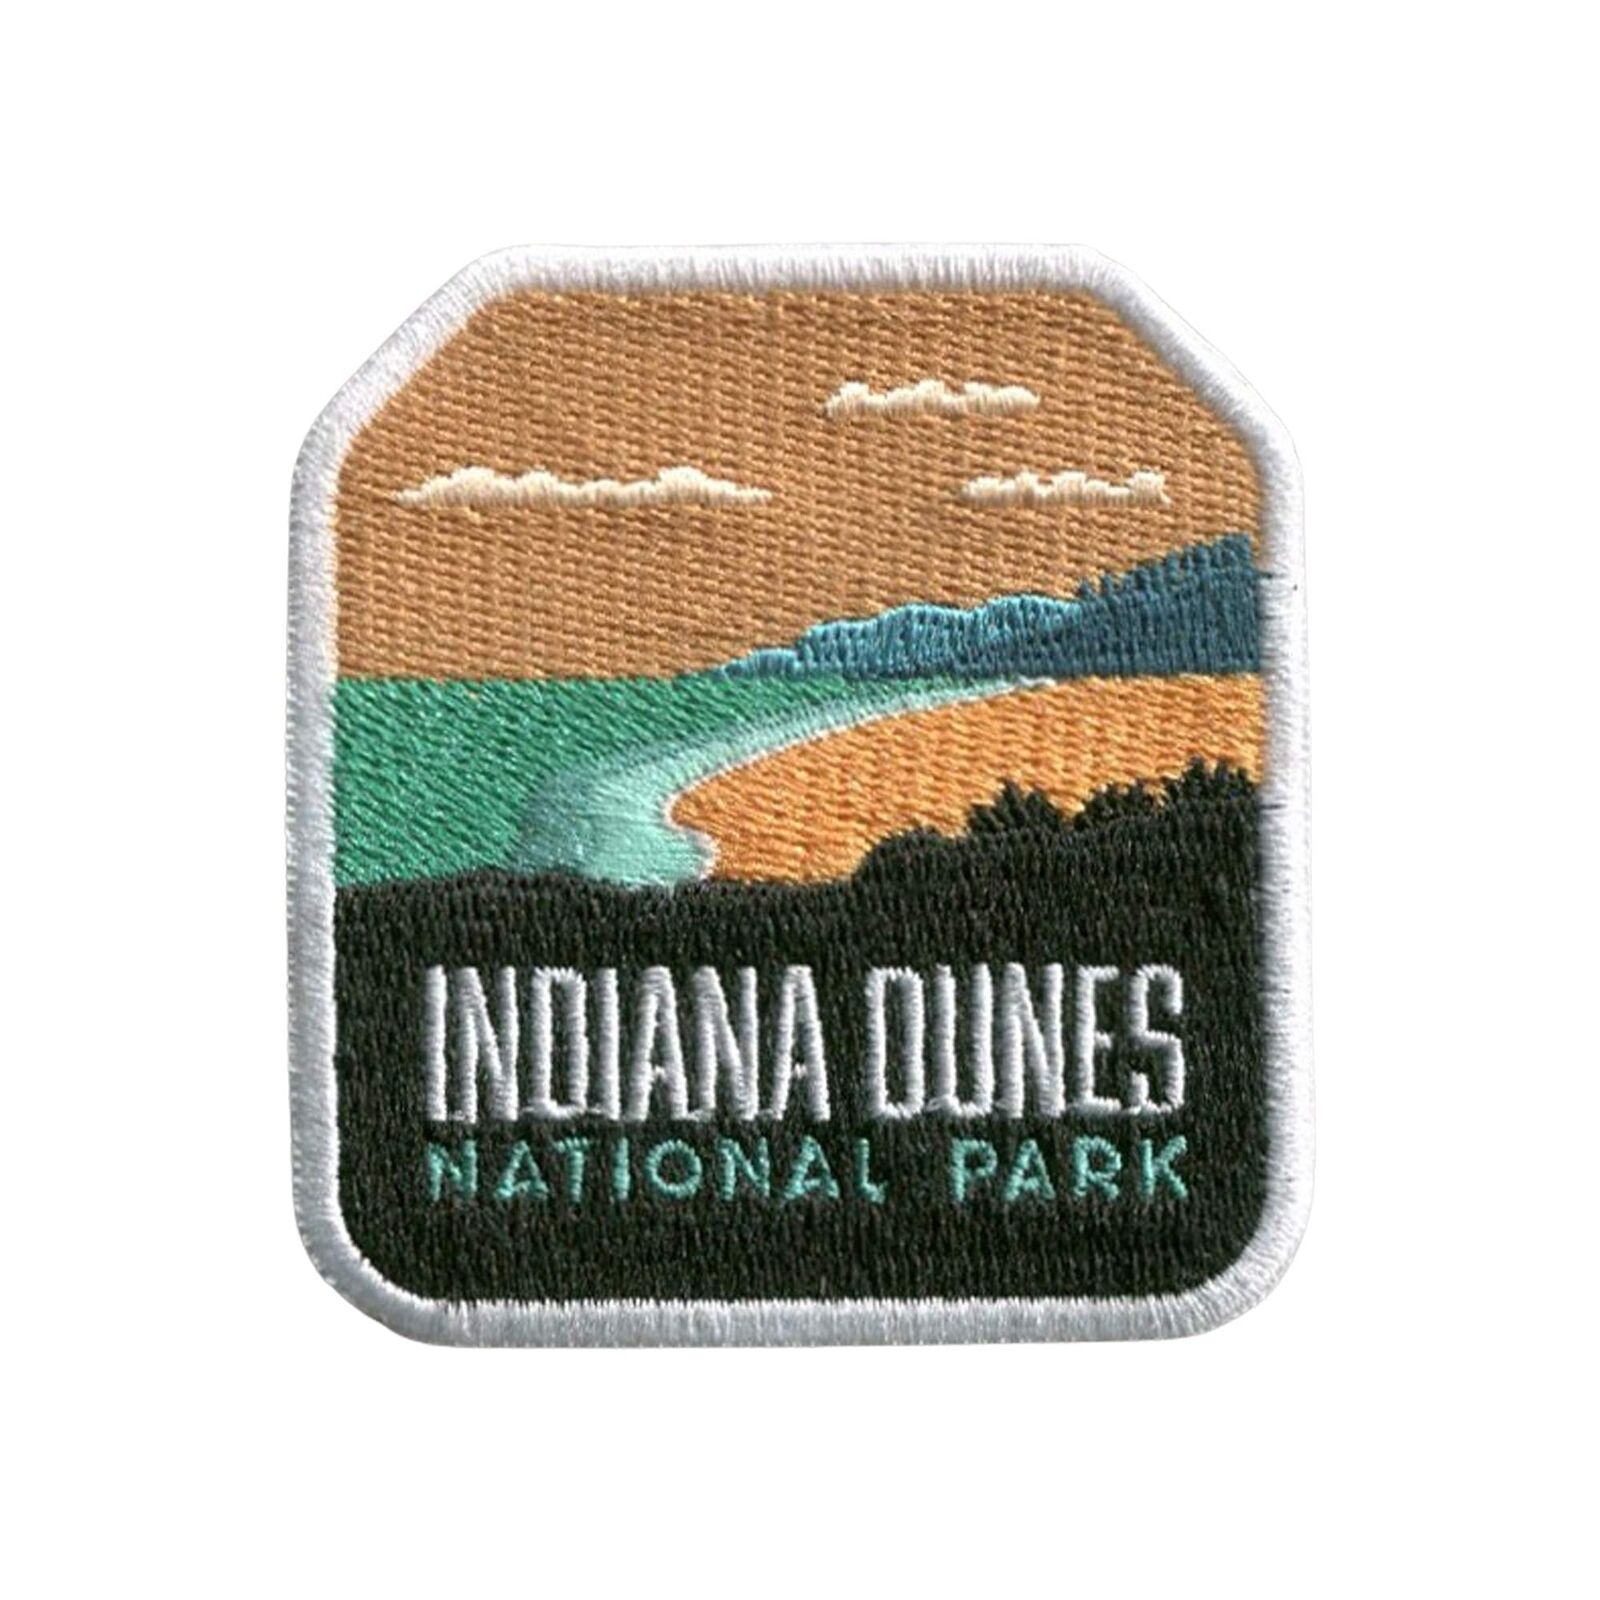 Indiana Dunes Iron on Travel Patch - Great Souvenir or Gift for travellers